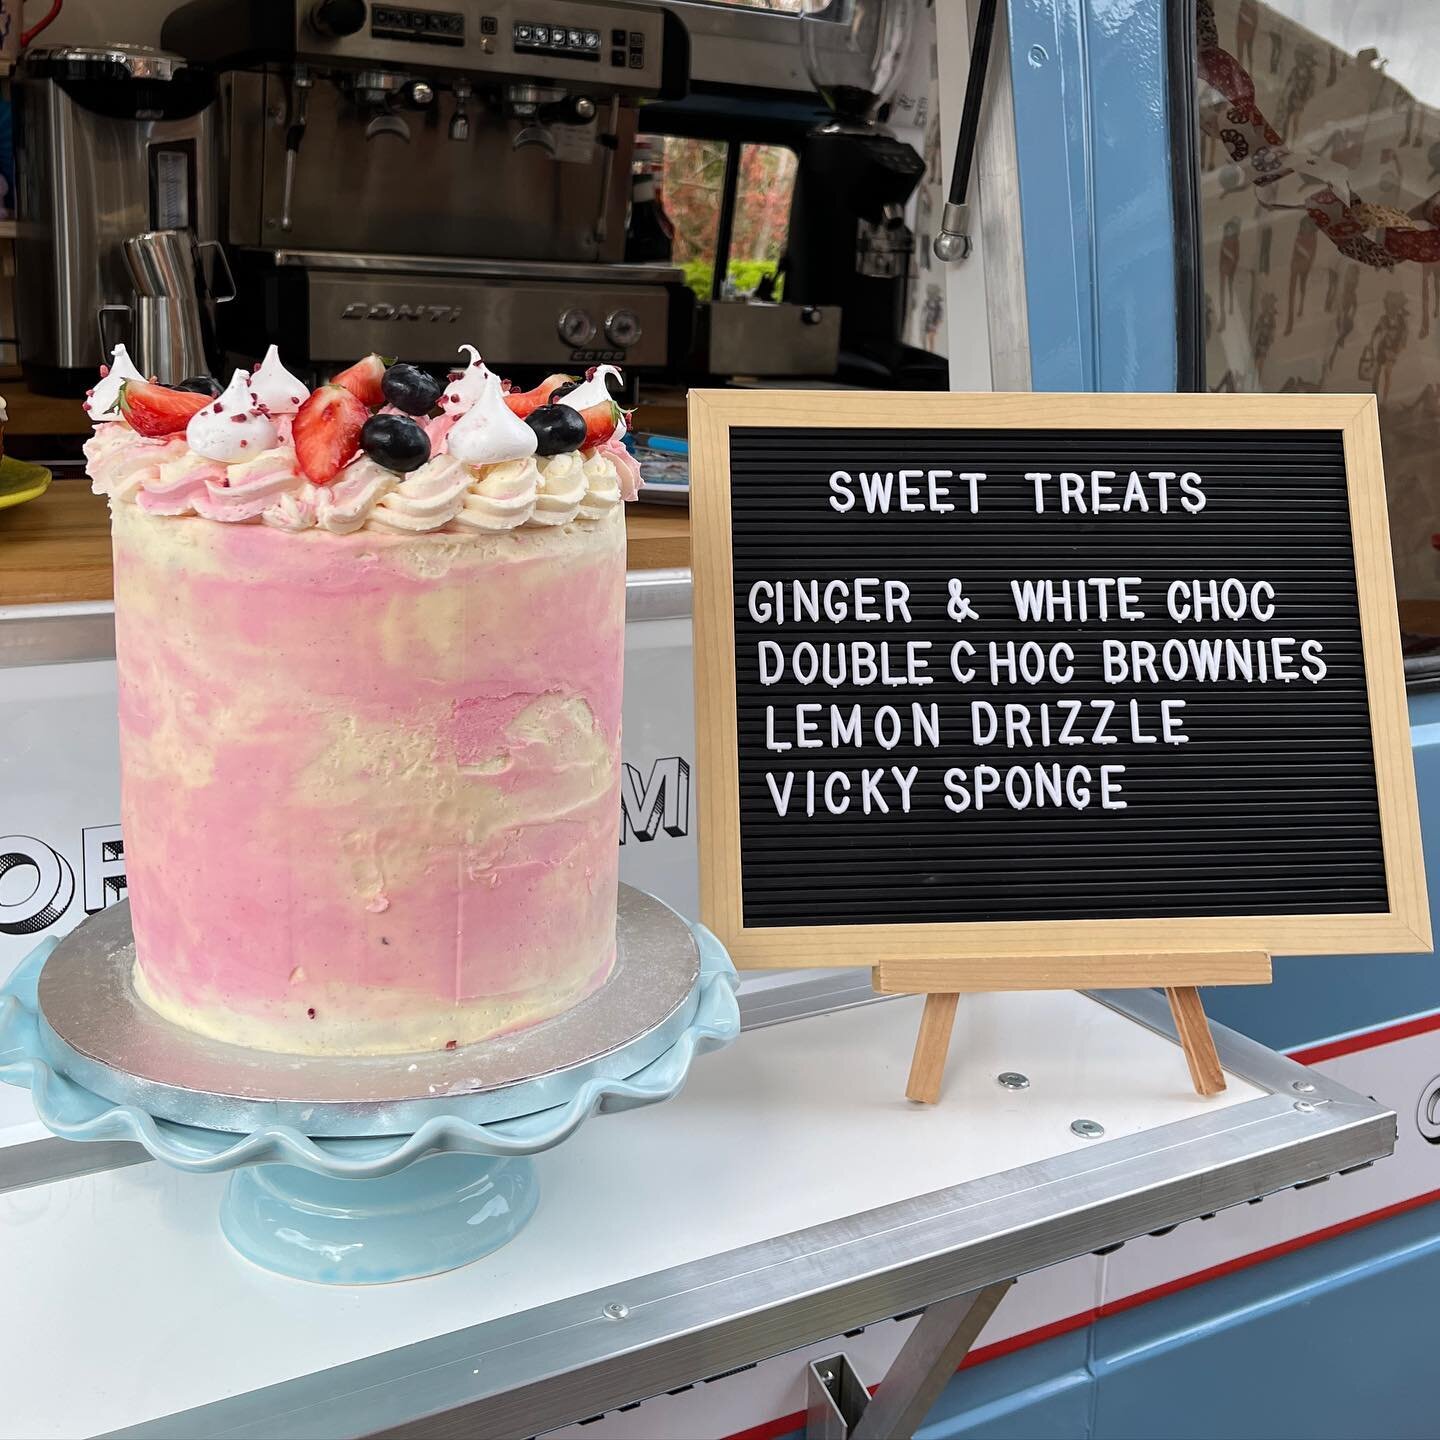 We&rsquo;ve had the most fantastic day on the van today🤍

Just a little spotlight post for the cakes, which need all of the love !! 

🏷️
#bakery #cakedecorating #cakelover #hertfordshire